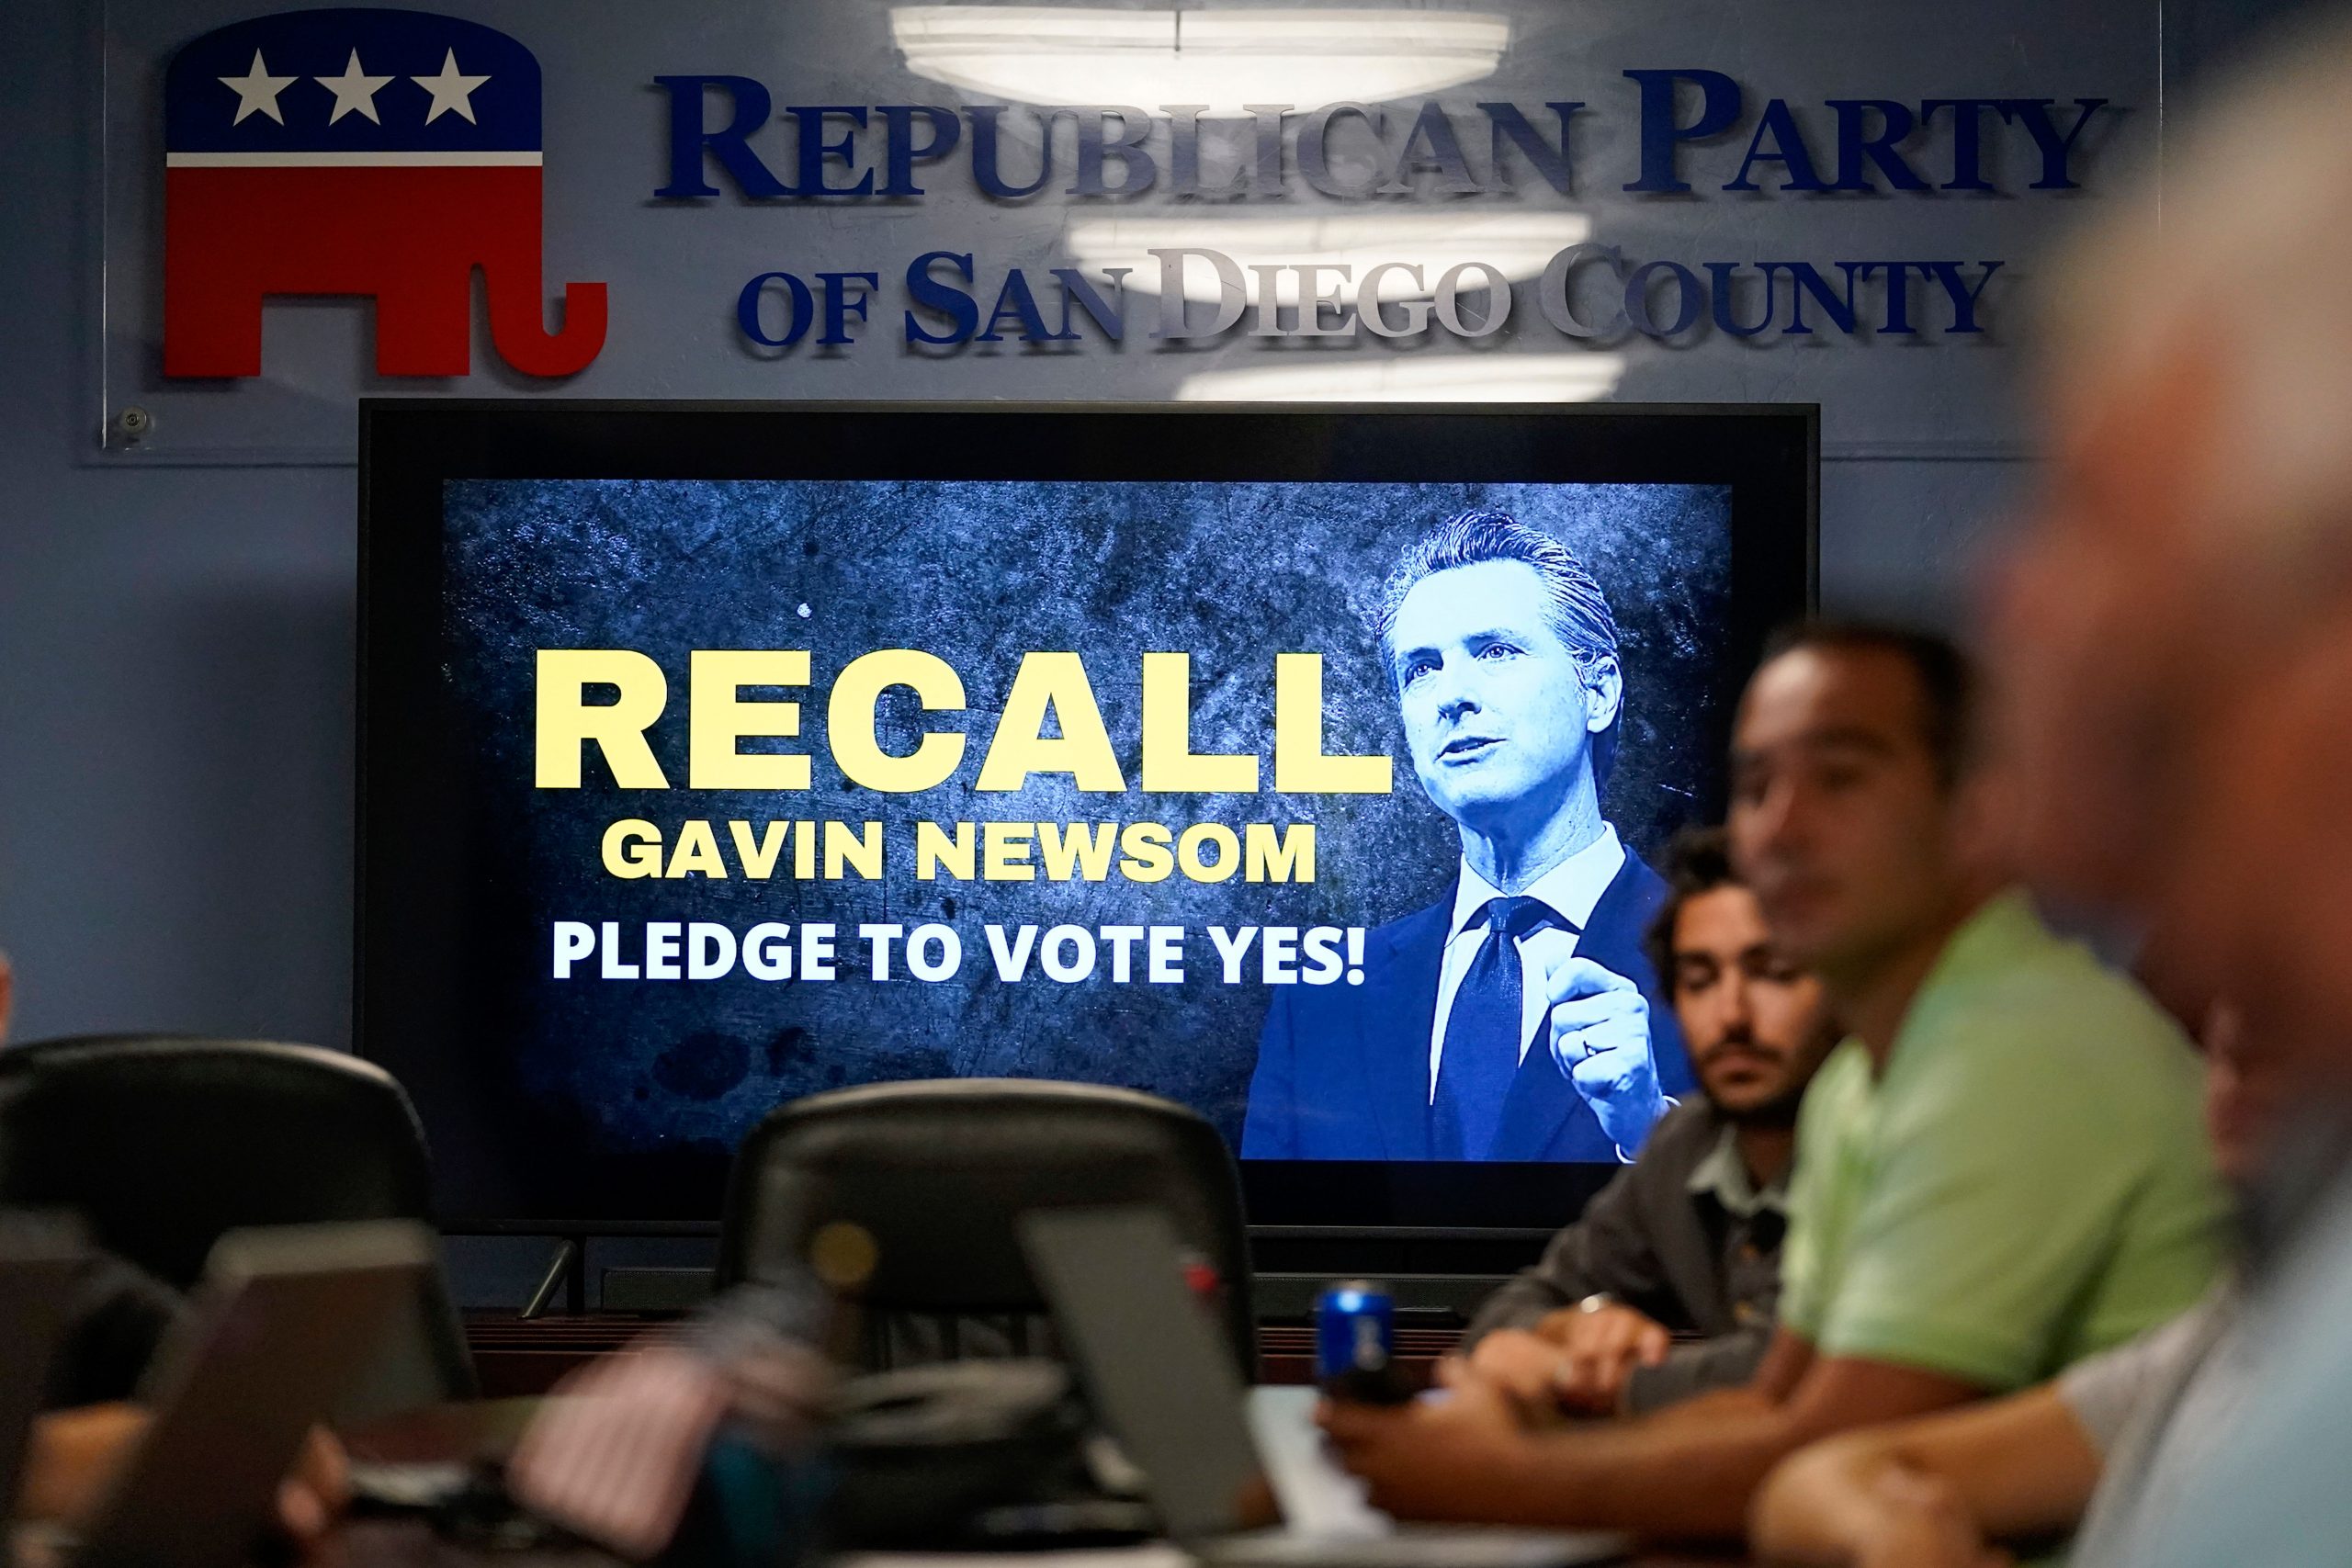 California Recall: Republicans ask people to vote while claiming election fraud